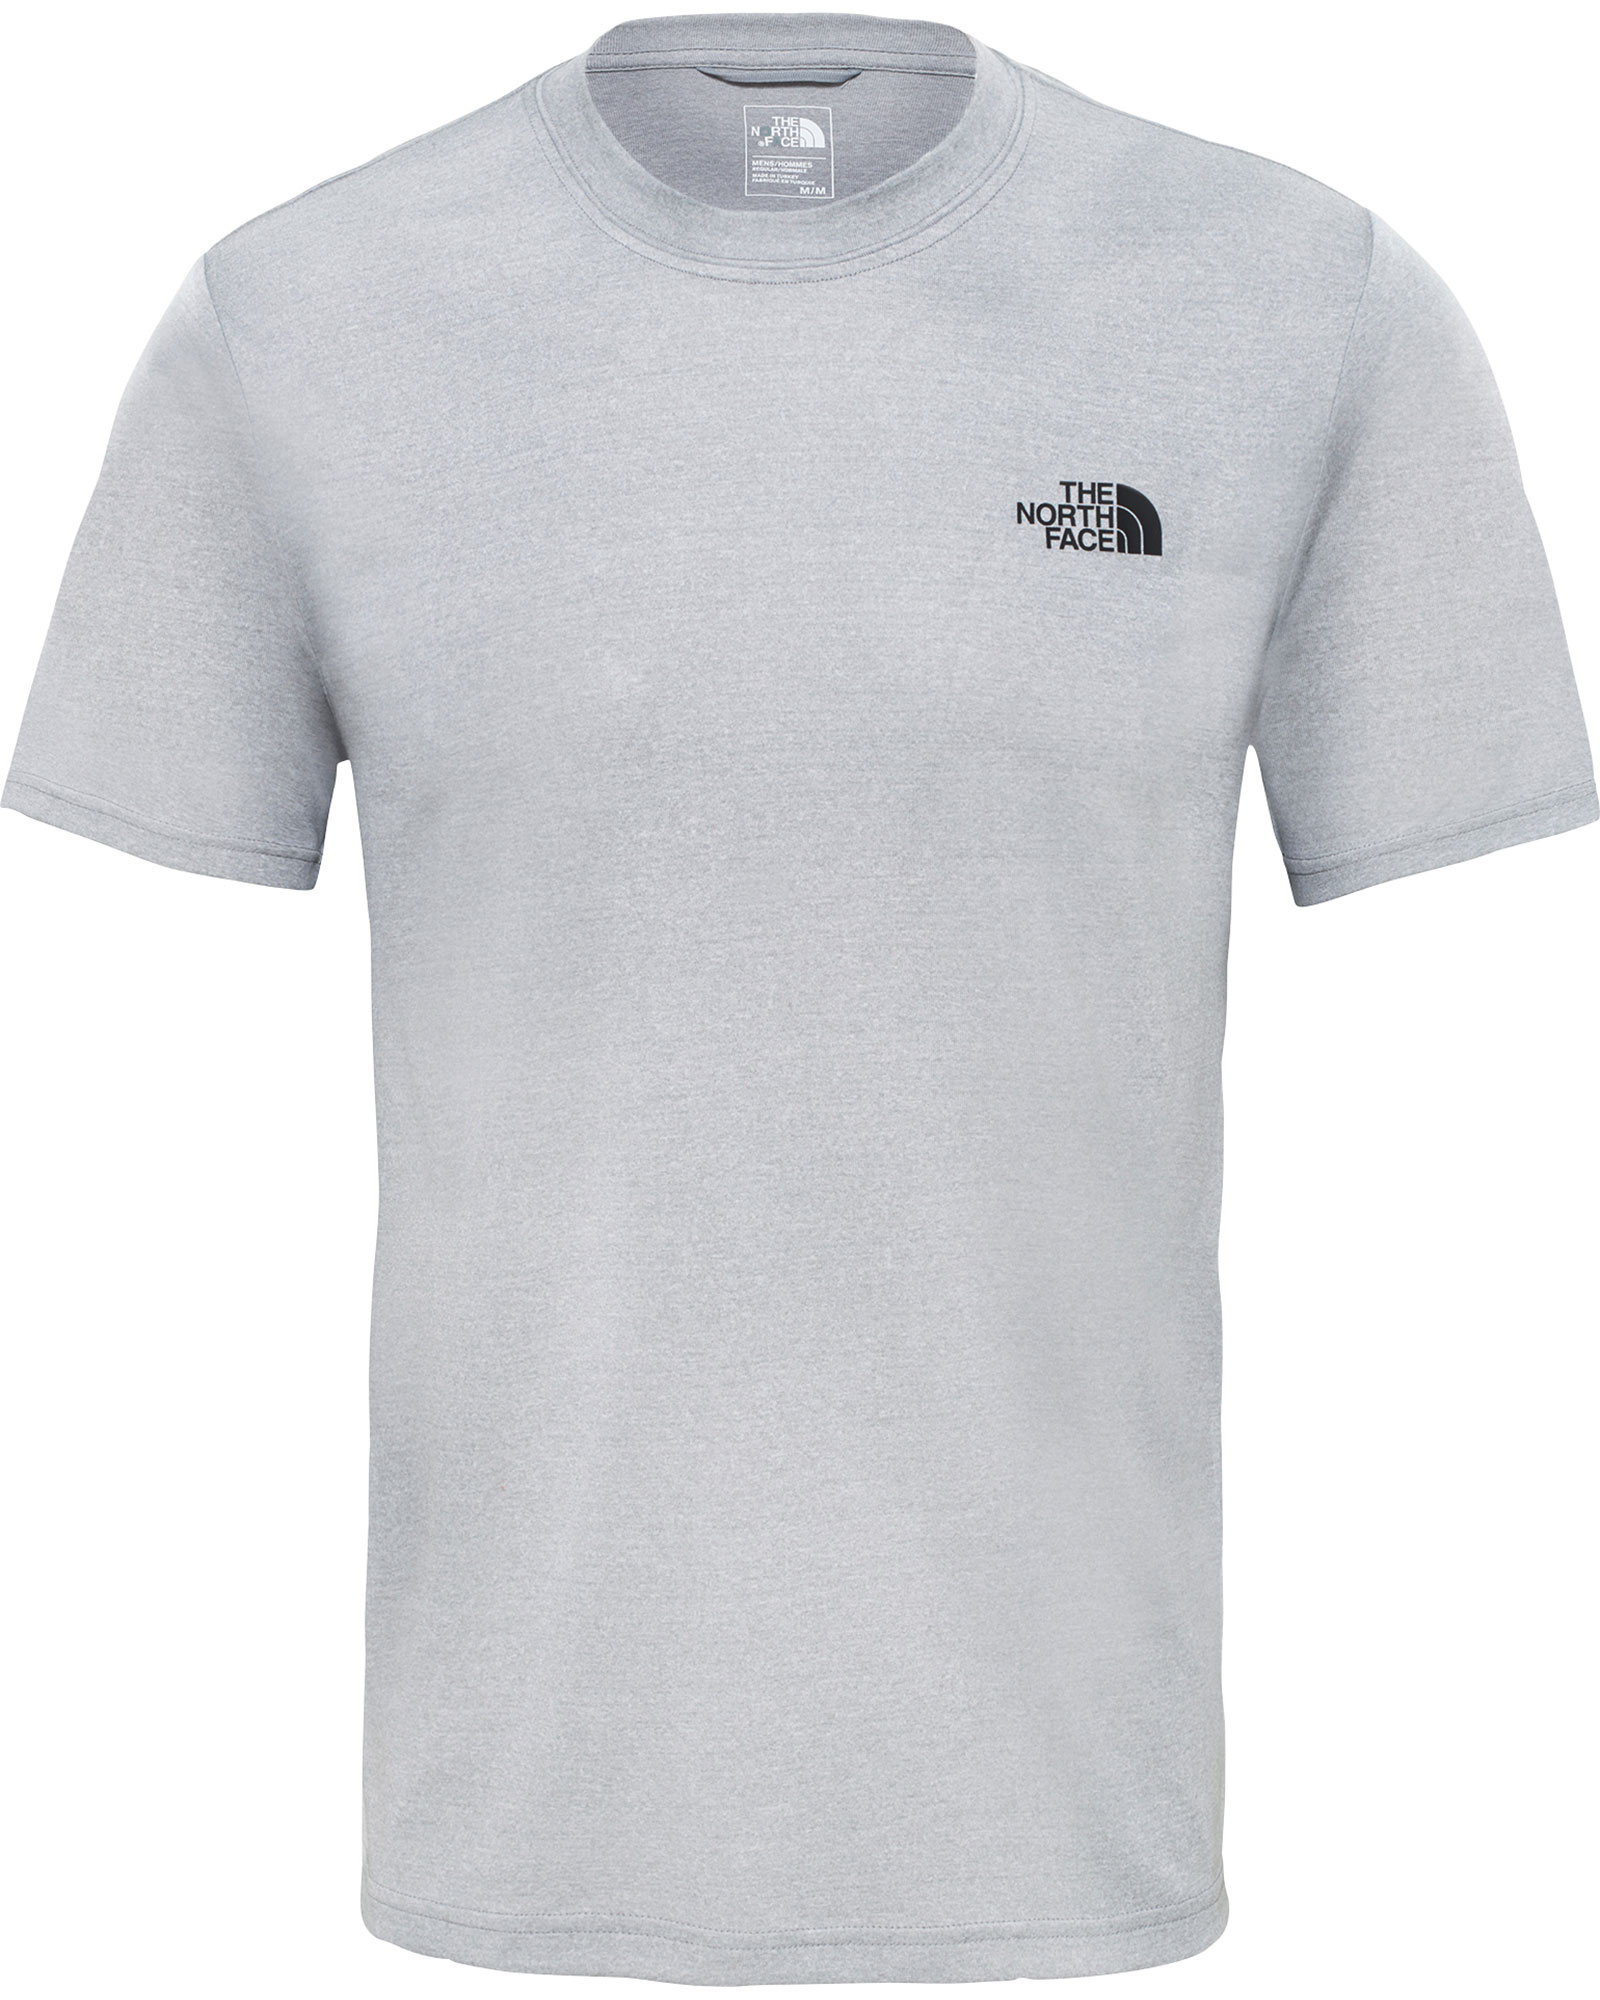 The North Face Reaxion Amp Men’s Crew T Shirt - TNF Light Grey Heather S